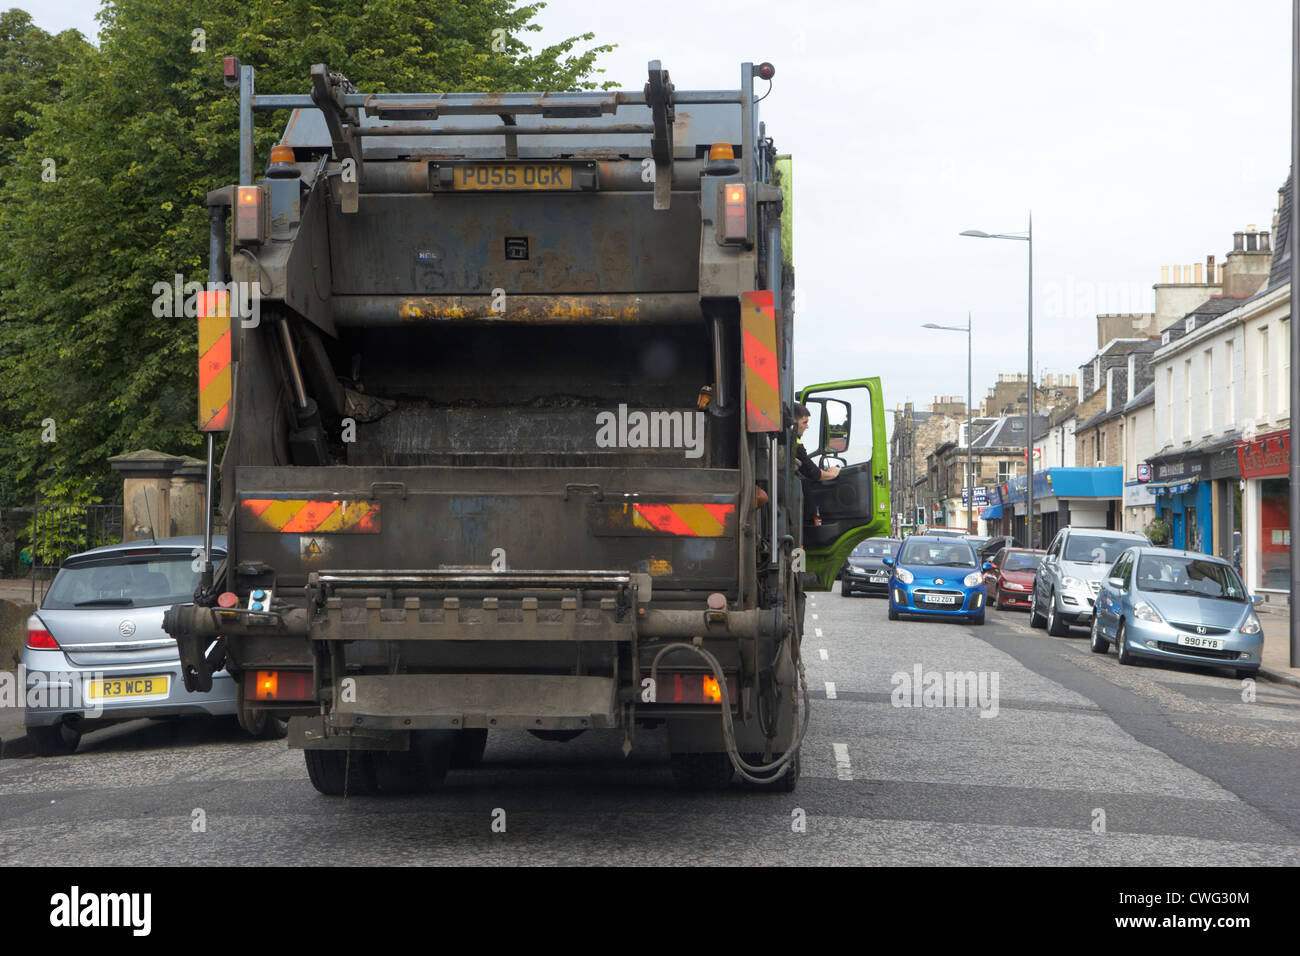 private company bin lorry double parked in the middle of the street in edinburgh, scotland, uk, united kingdom Stock Photo